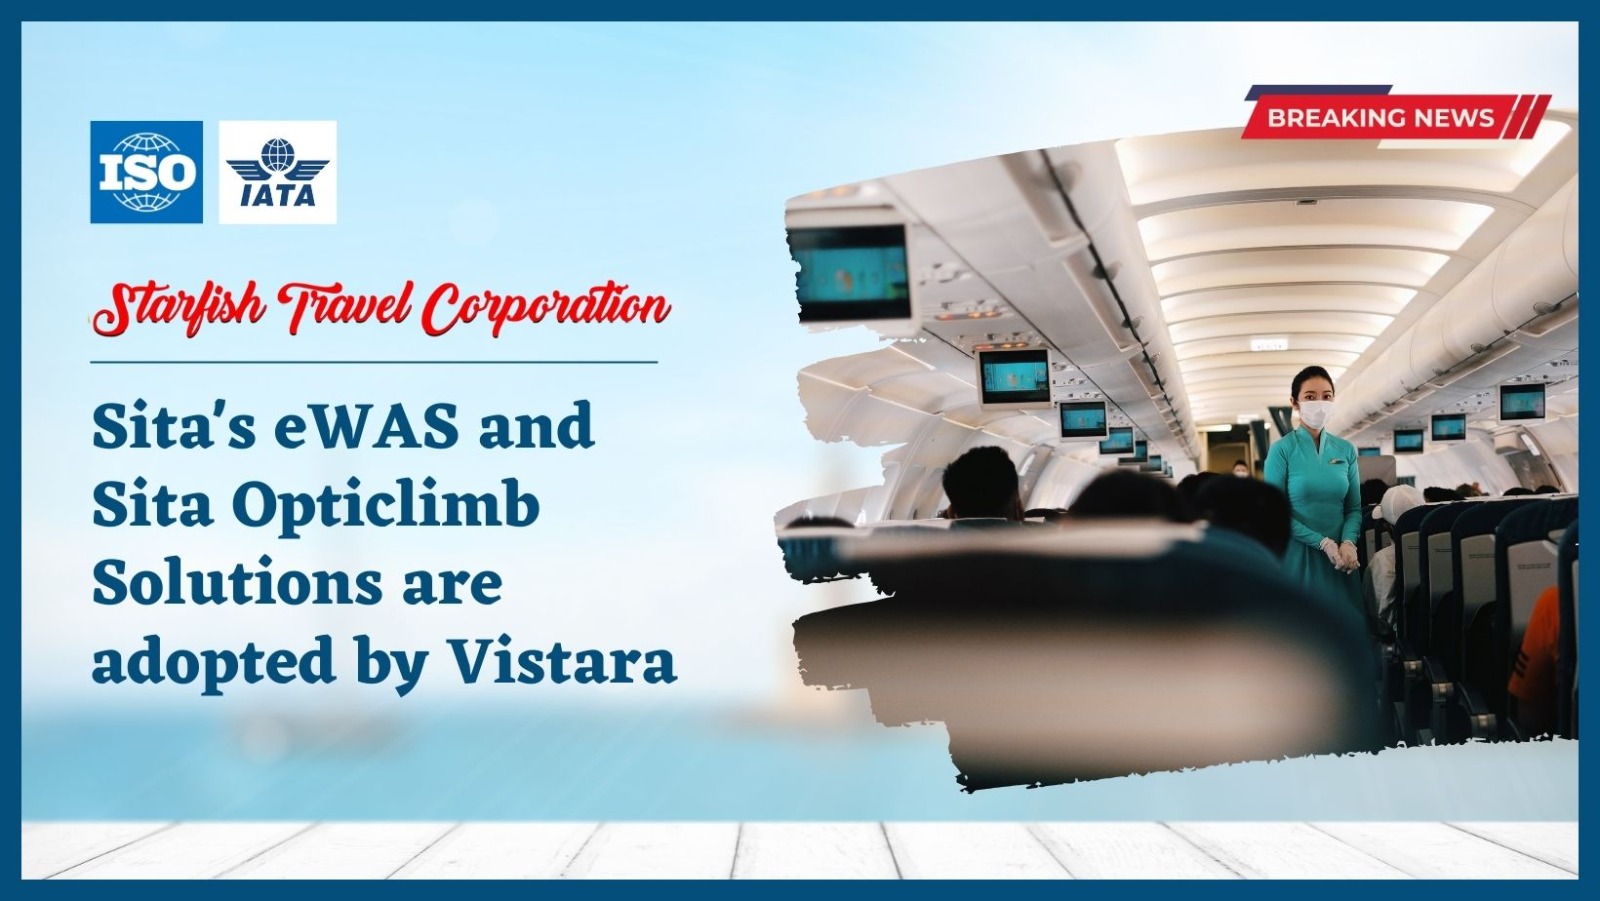 You are currently viewing Sita’s eWAS and Sita Opticlimb Solutions are adopted by Vistara